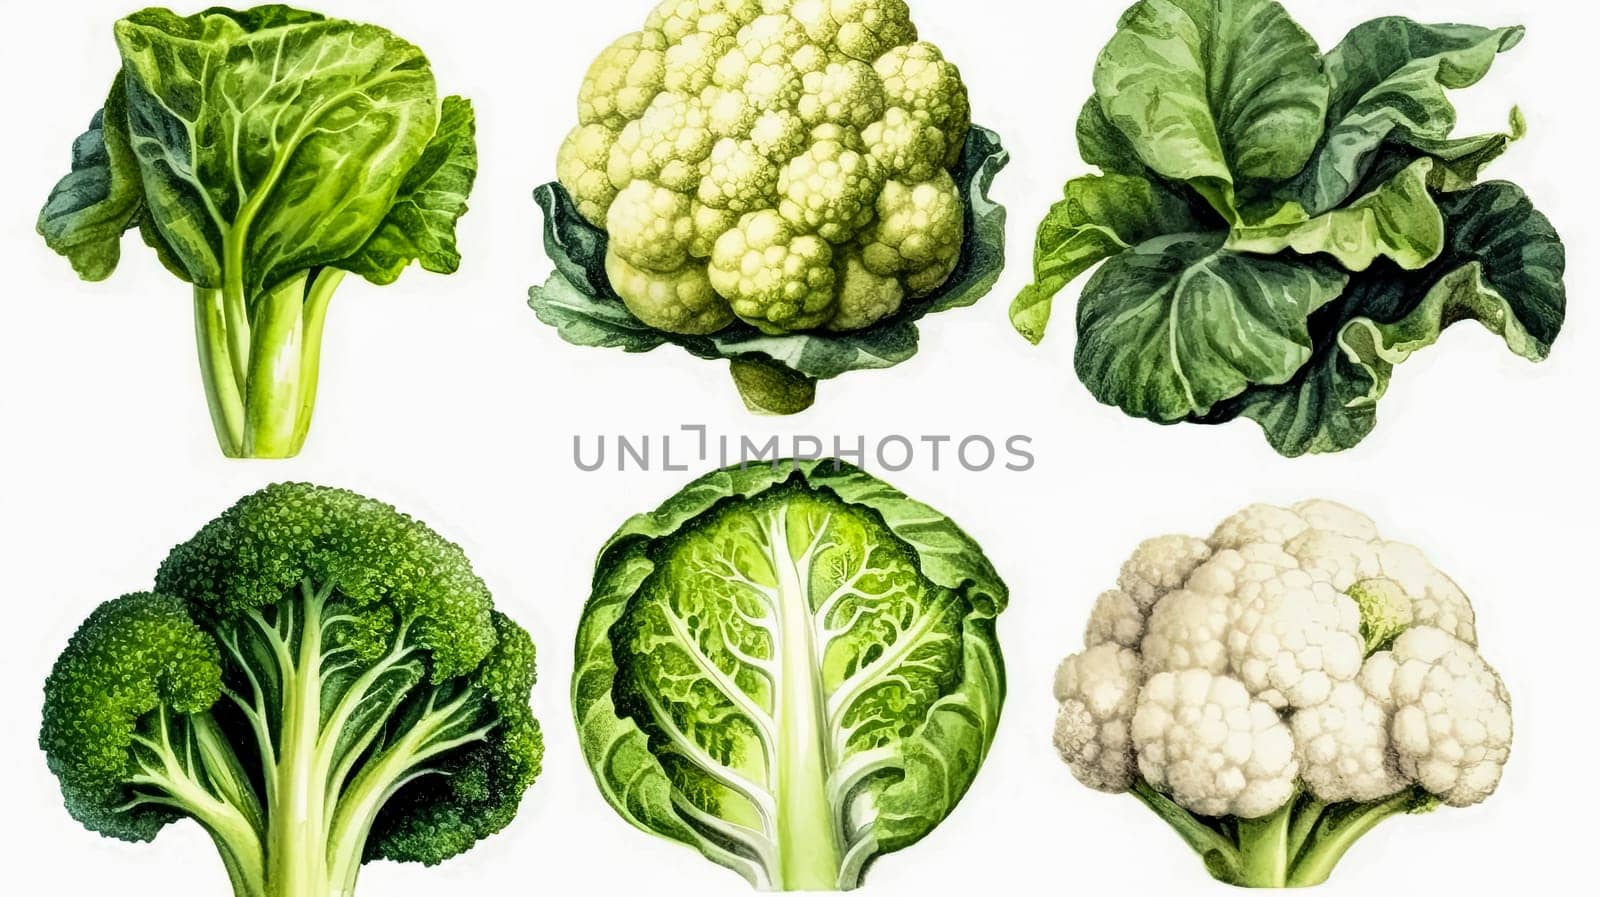 palette unveils the charm of different cabbages by Alla_Morozova93